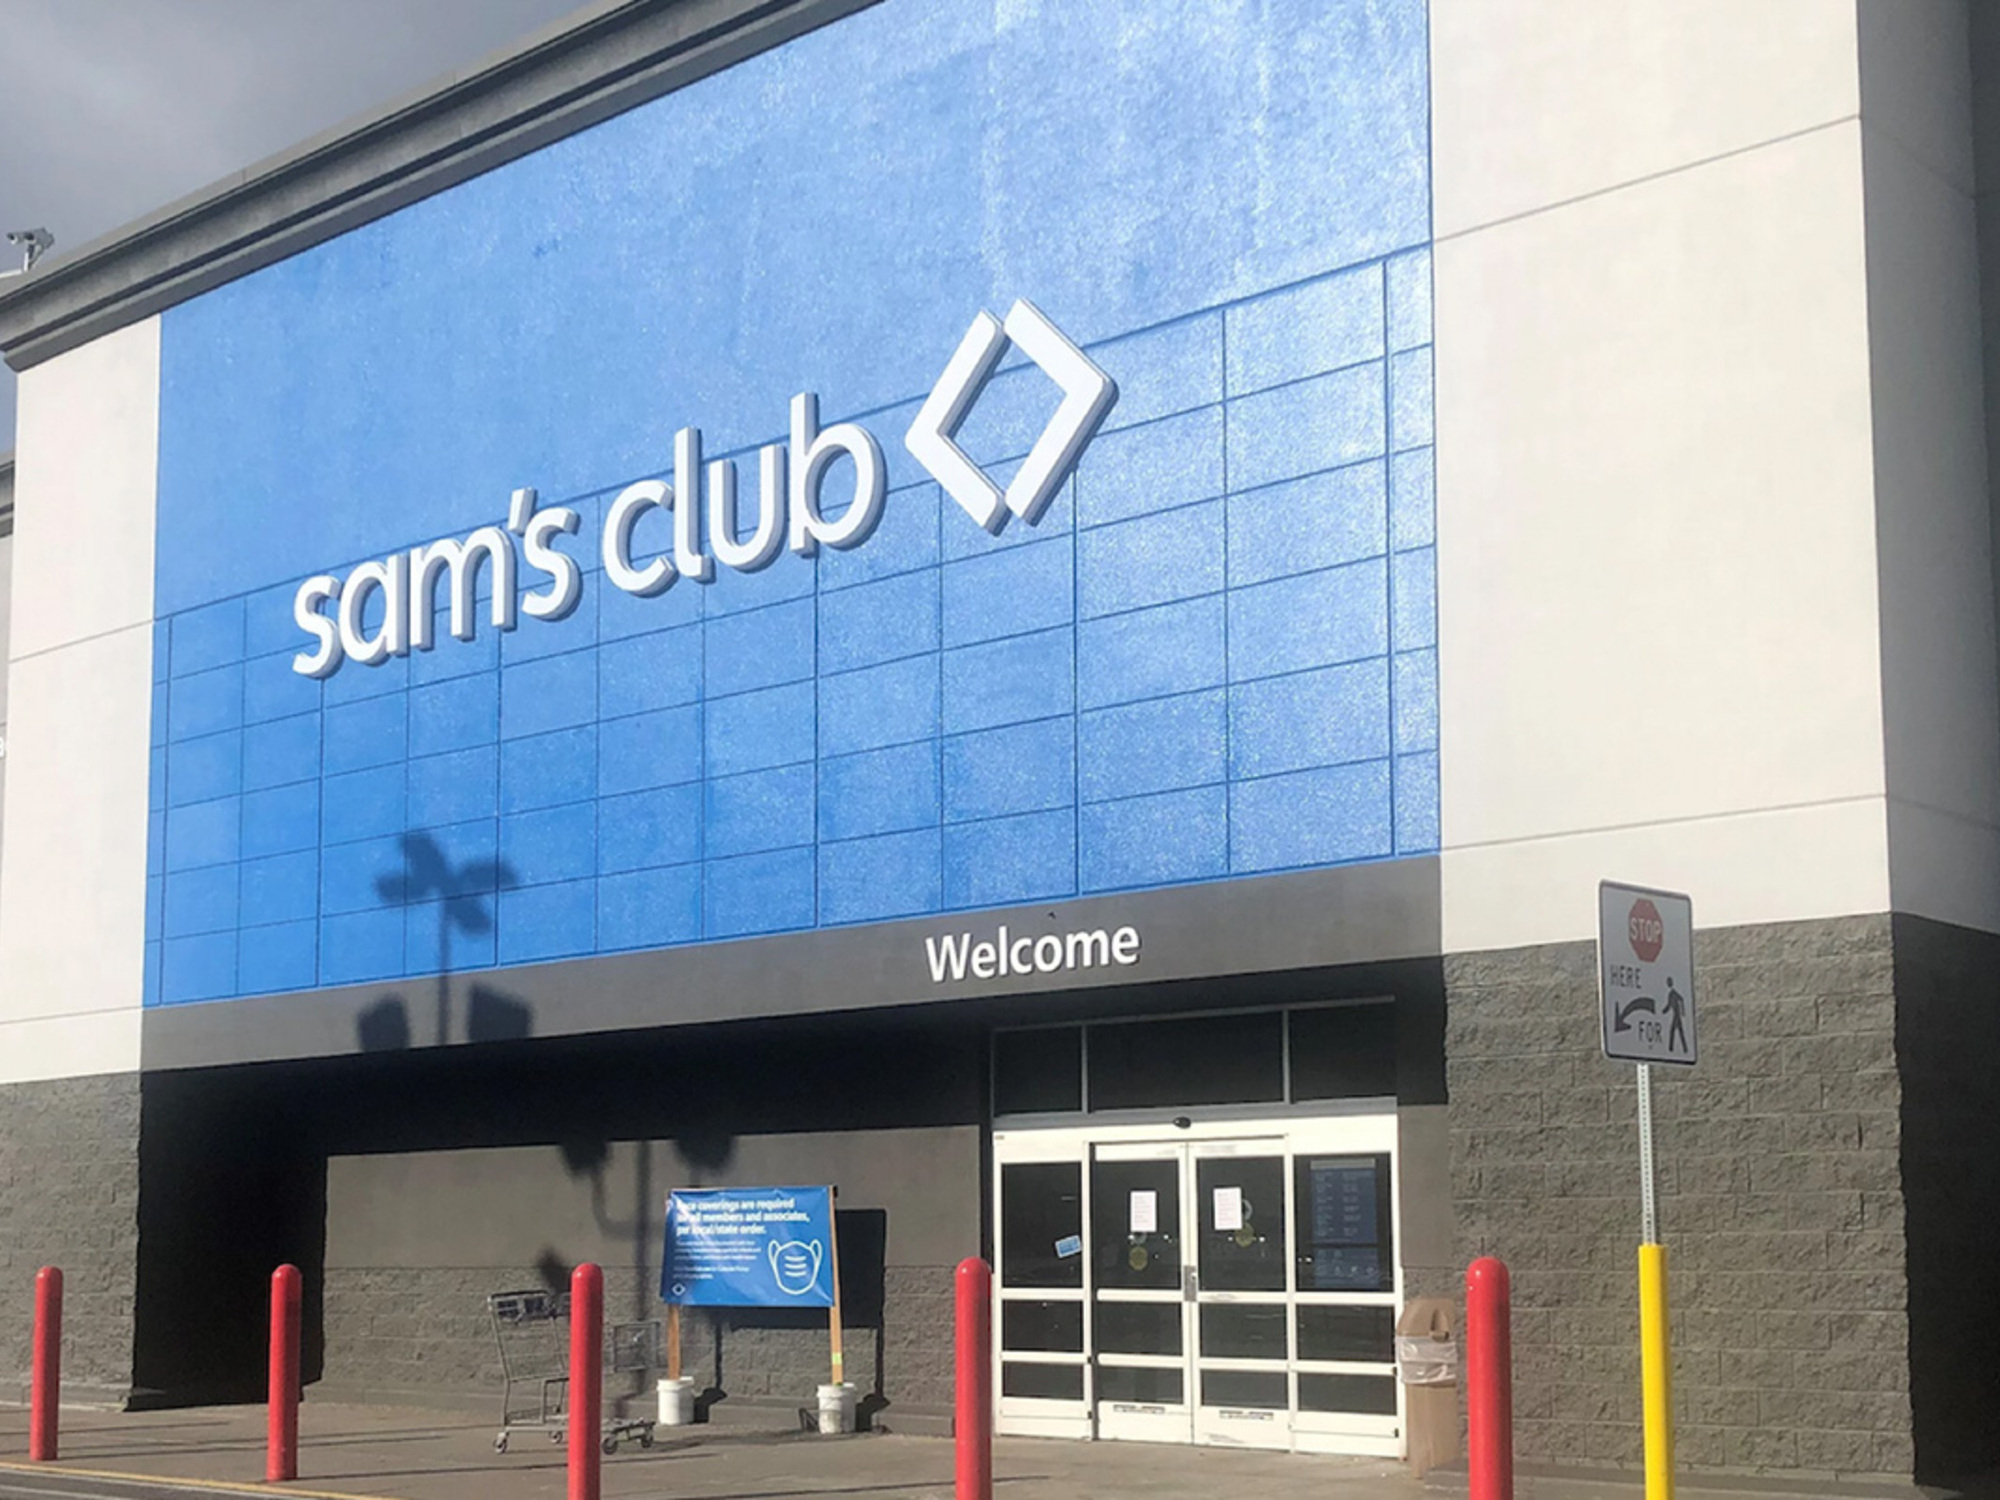 You can get a Sam’s Club membership for half off, right now